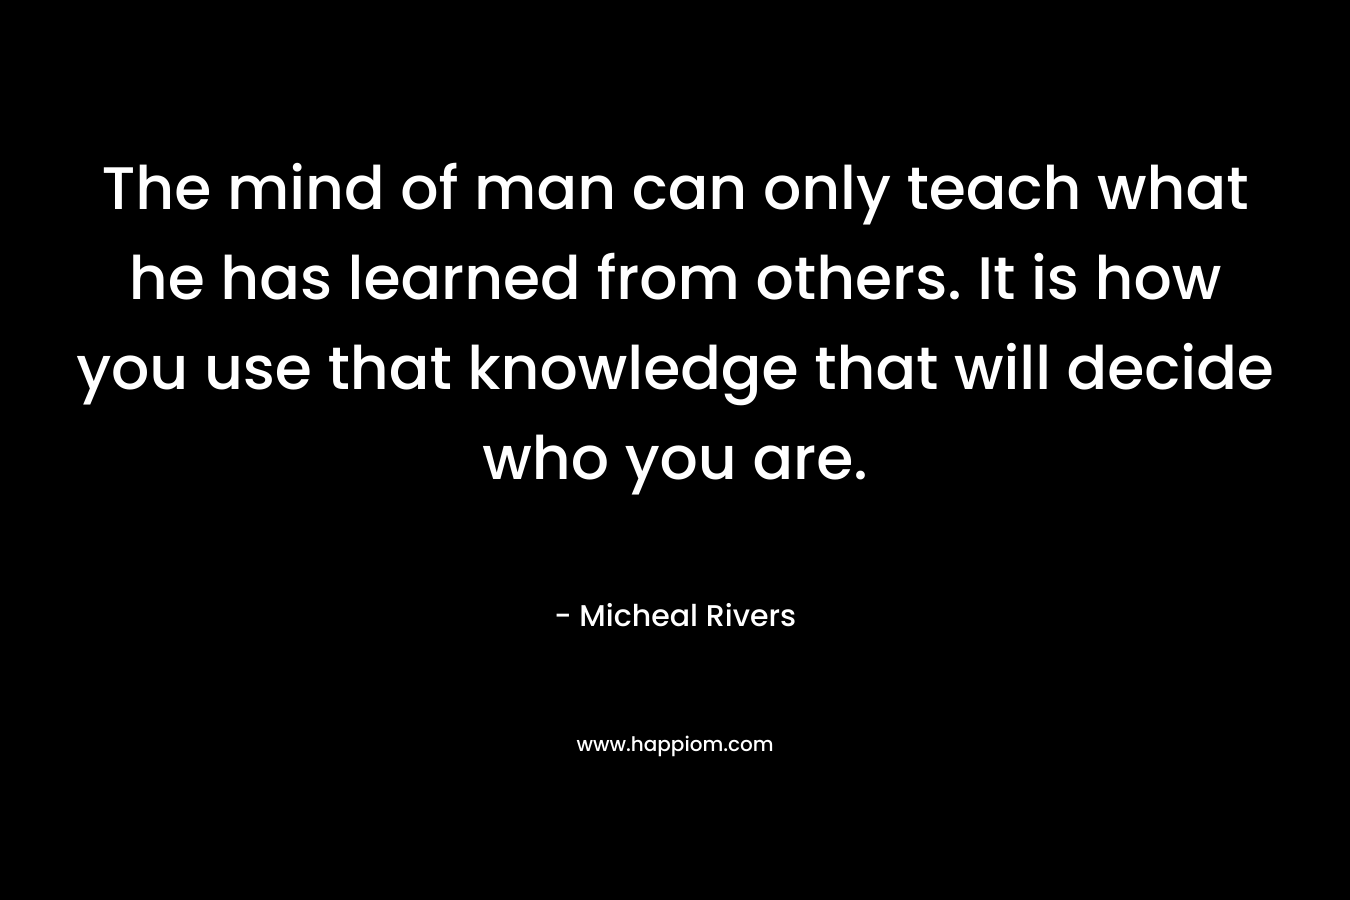 The mind of man can only teach what he has learned from others. It is how you use that knowledge that will decide who you are.